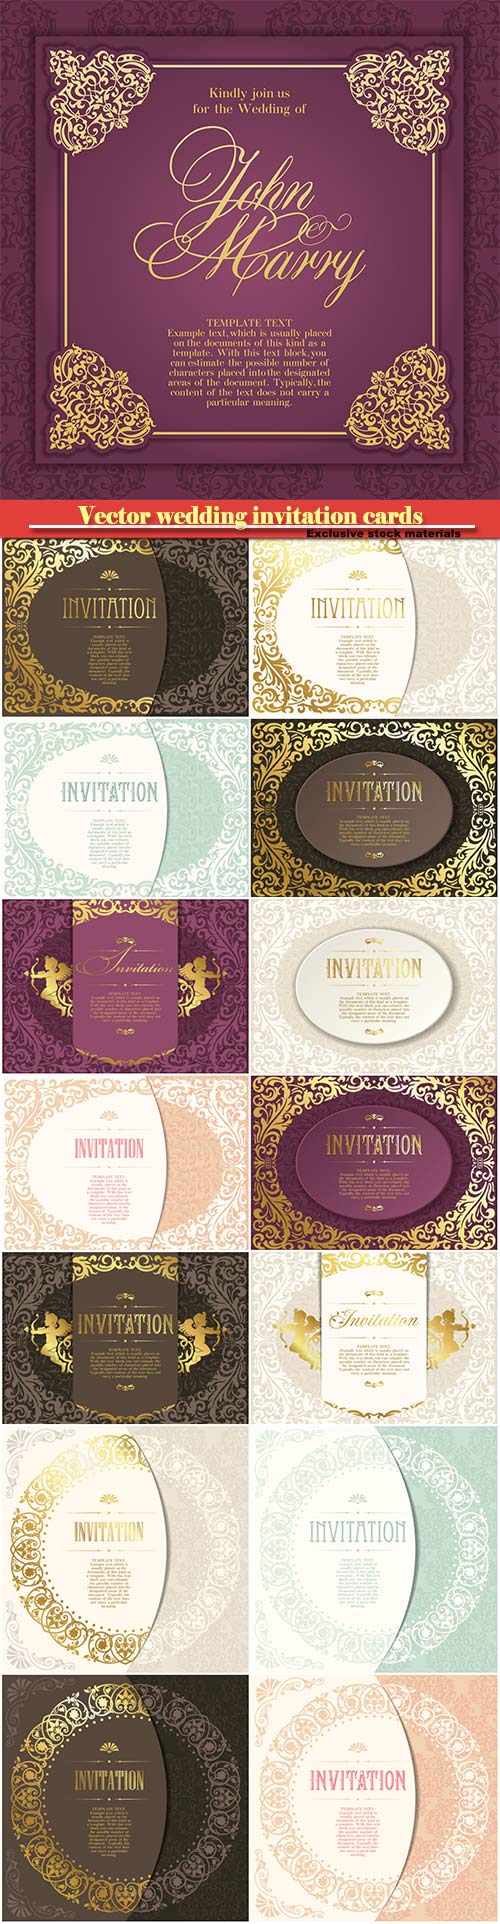 Vector wedding invitation cards with gold patterns